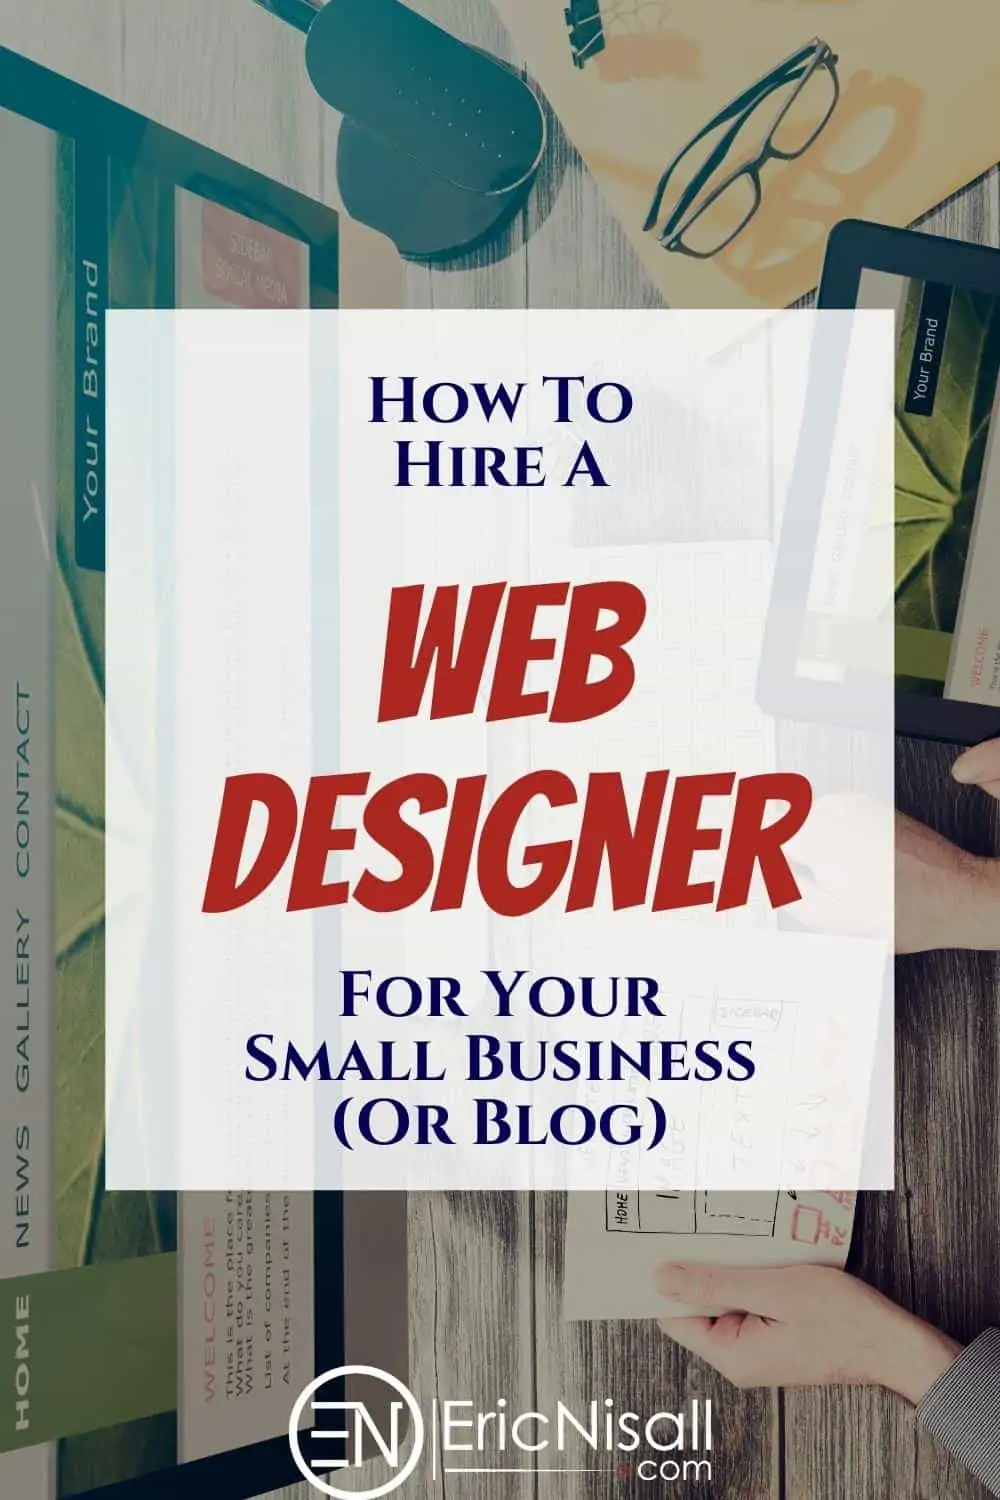 If you run a small business you definitely need a website. The problem is knowing how to hire a web designer. I have some tips that'll simplify the process. via @ericnisall